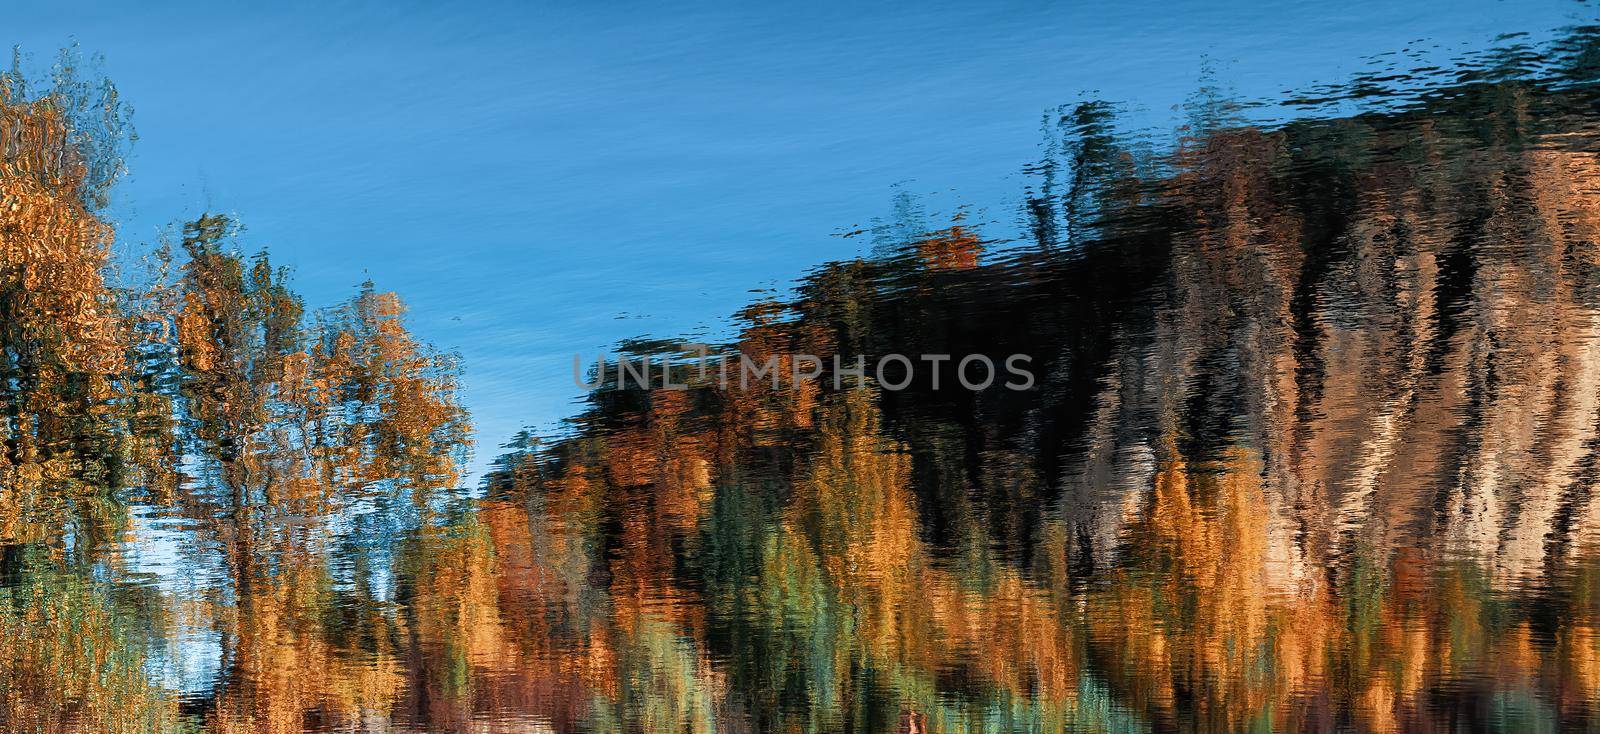 Abstract natural background. Reflection of an autumn forest in the water of a mountain lake